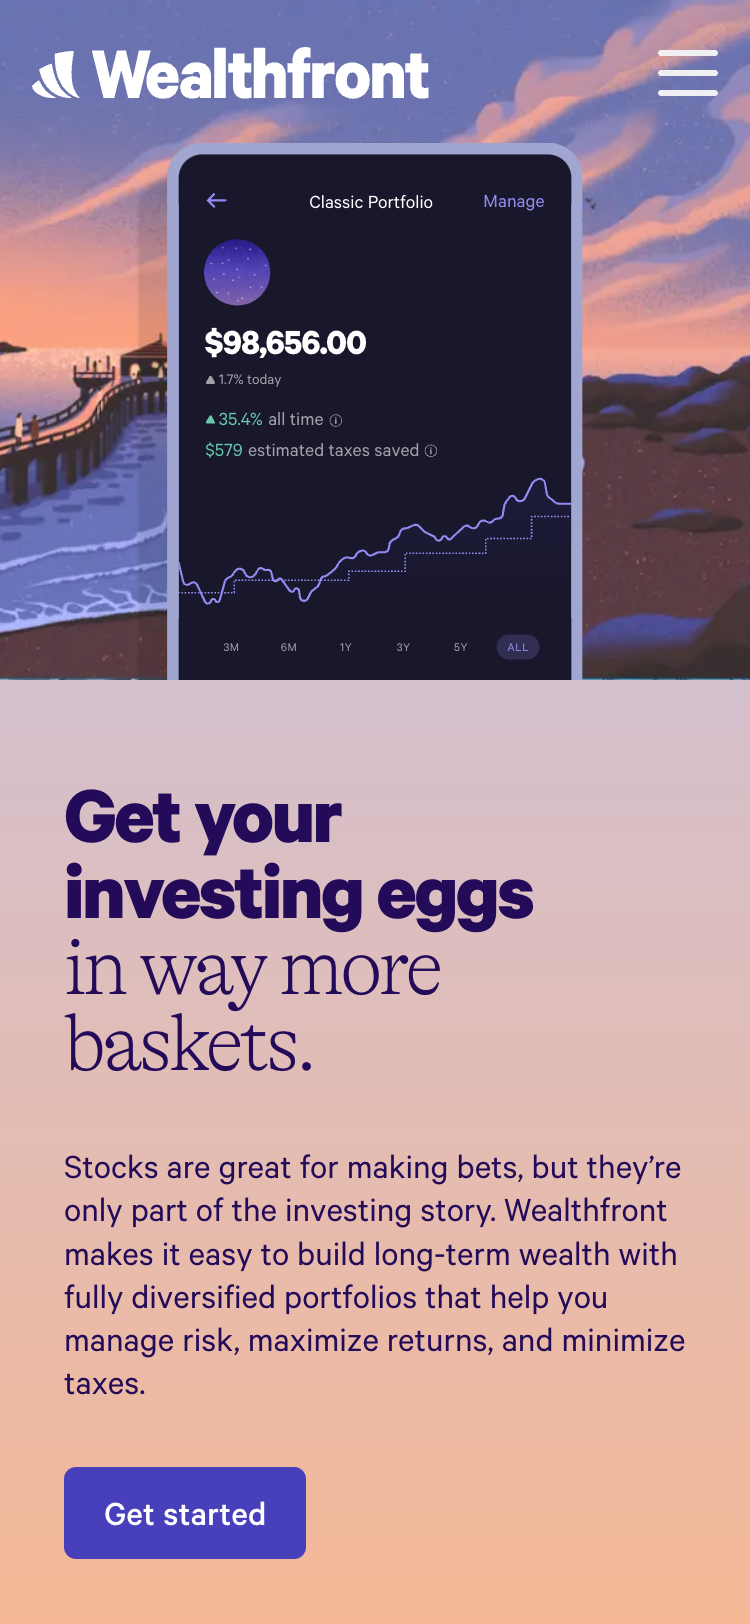 Mobile screenshot of the Wealthfront website. The header contains the Wealthfront logo and a menu button. At the top of the screen is a screenshot of the Wealthfront mobile app. Underneath is some information text followed by a 'Get started' call-to-action button.